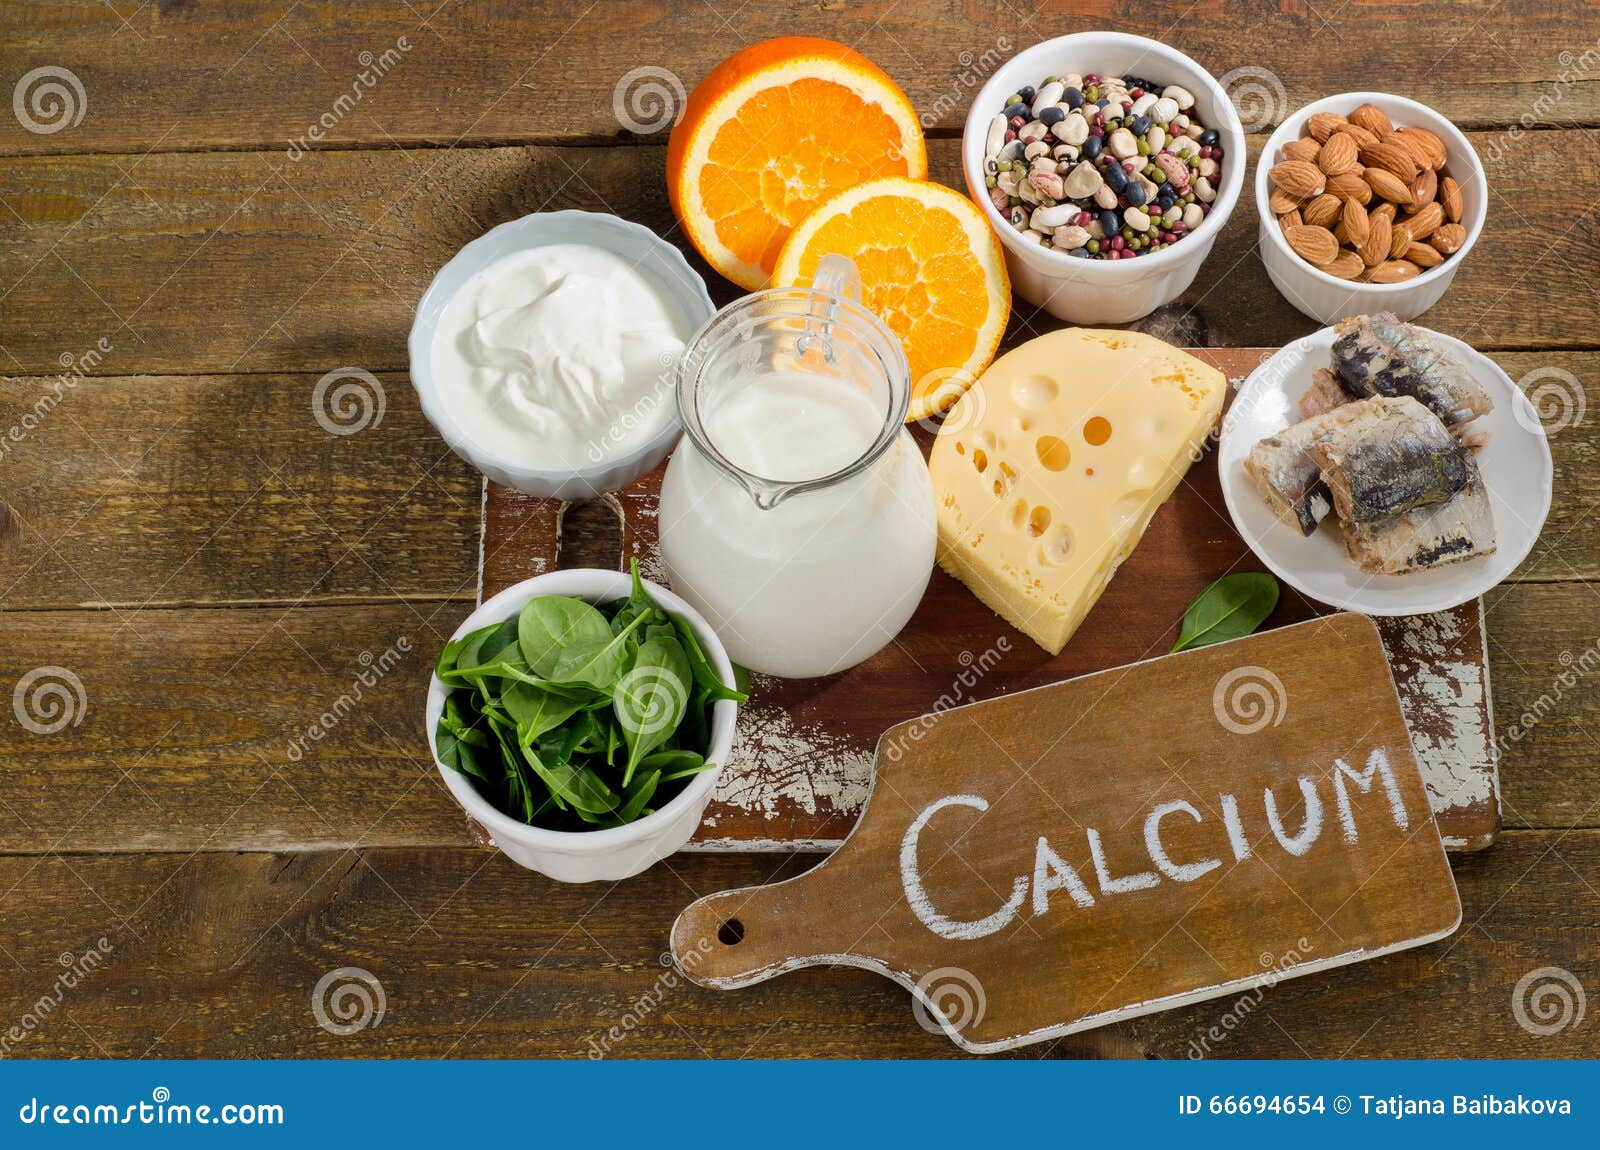 best calcium rich foods sources. healthy eating